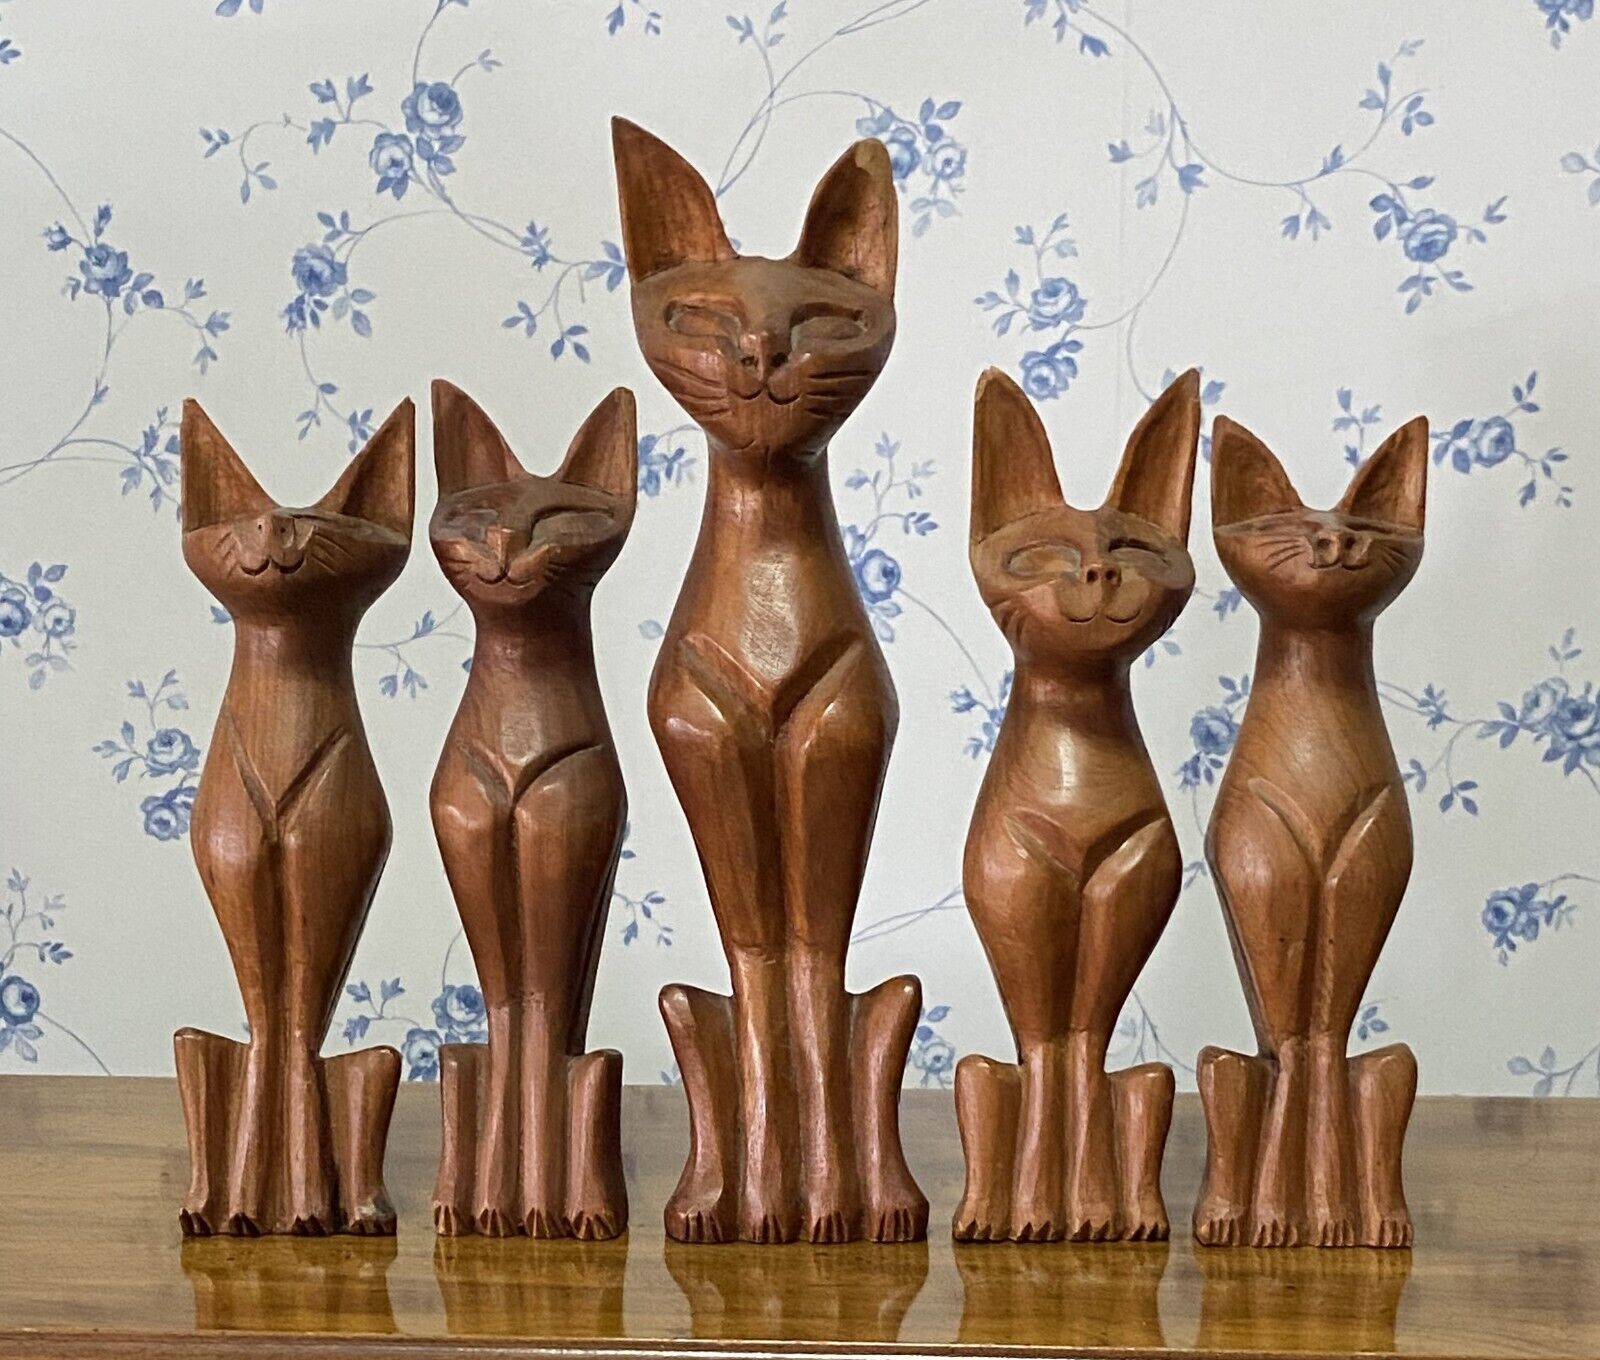 Set of Five Vintage Wood Hand Carved Siamese Cat Sculptures Statues Handcrafted 